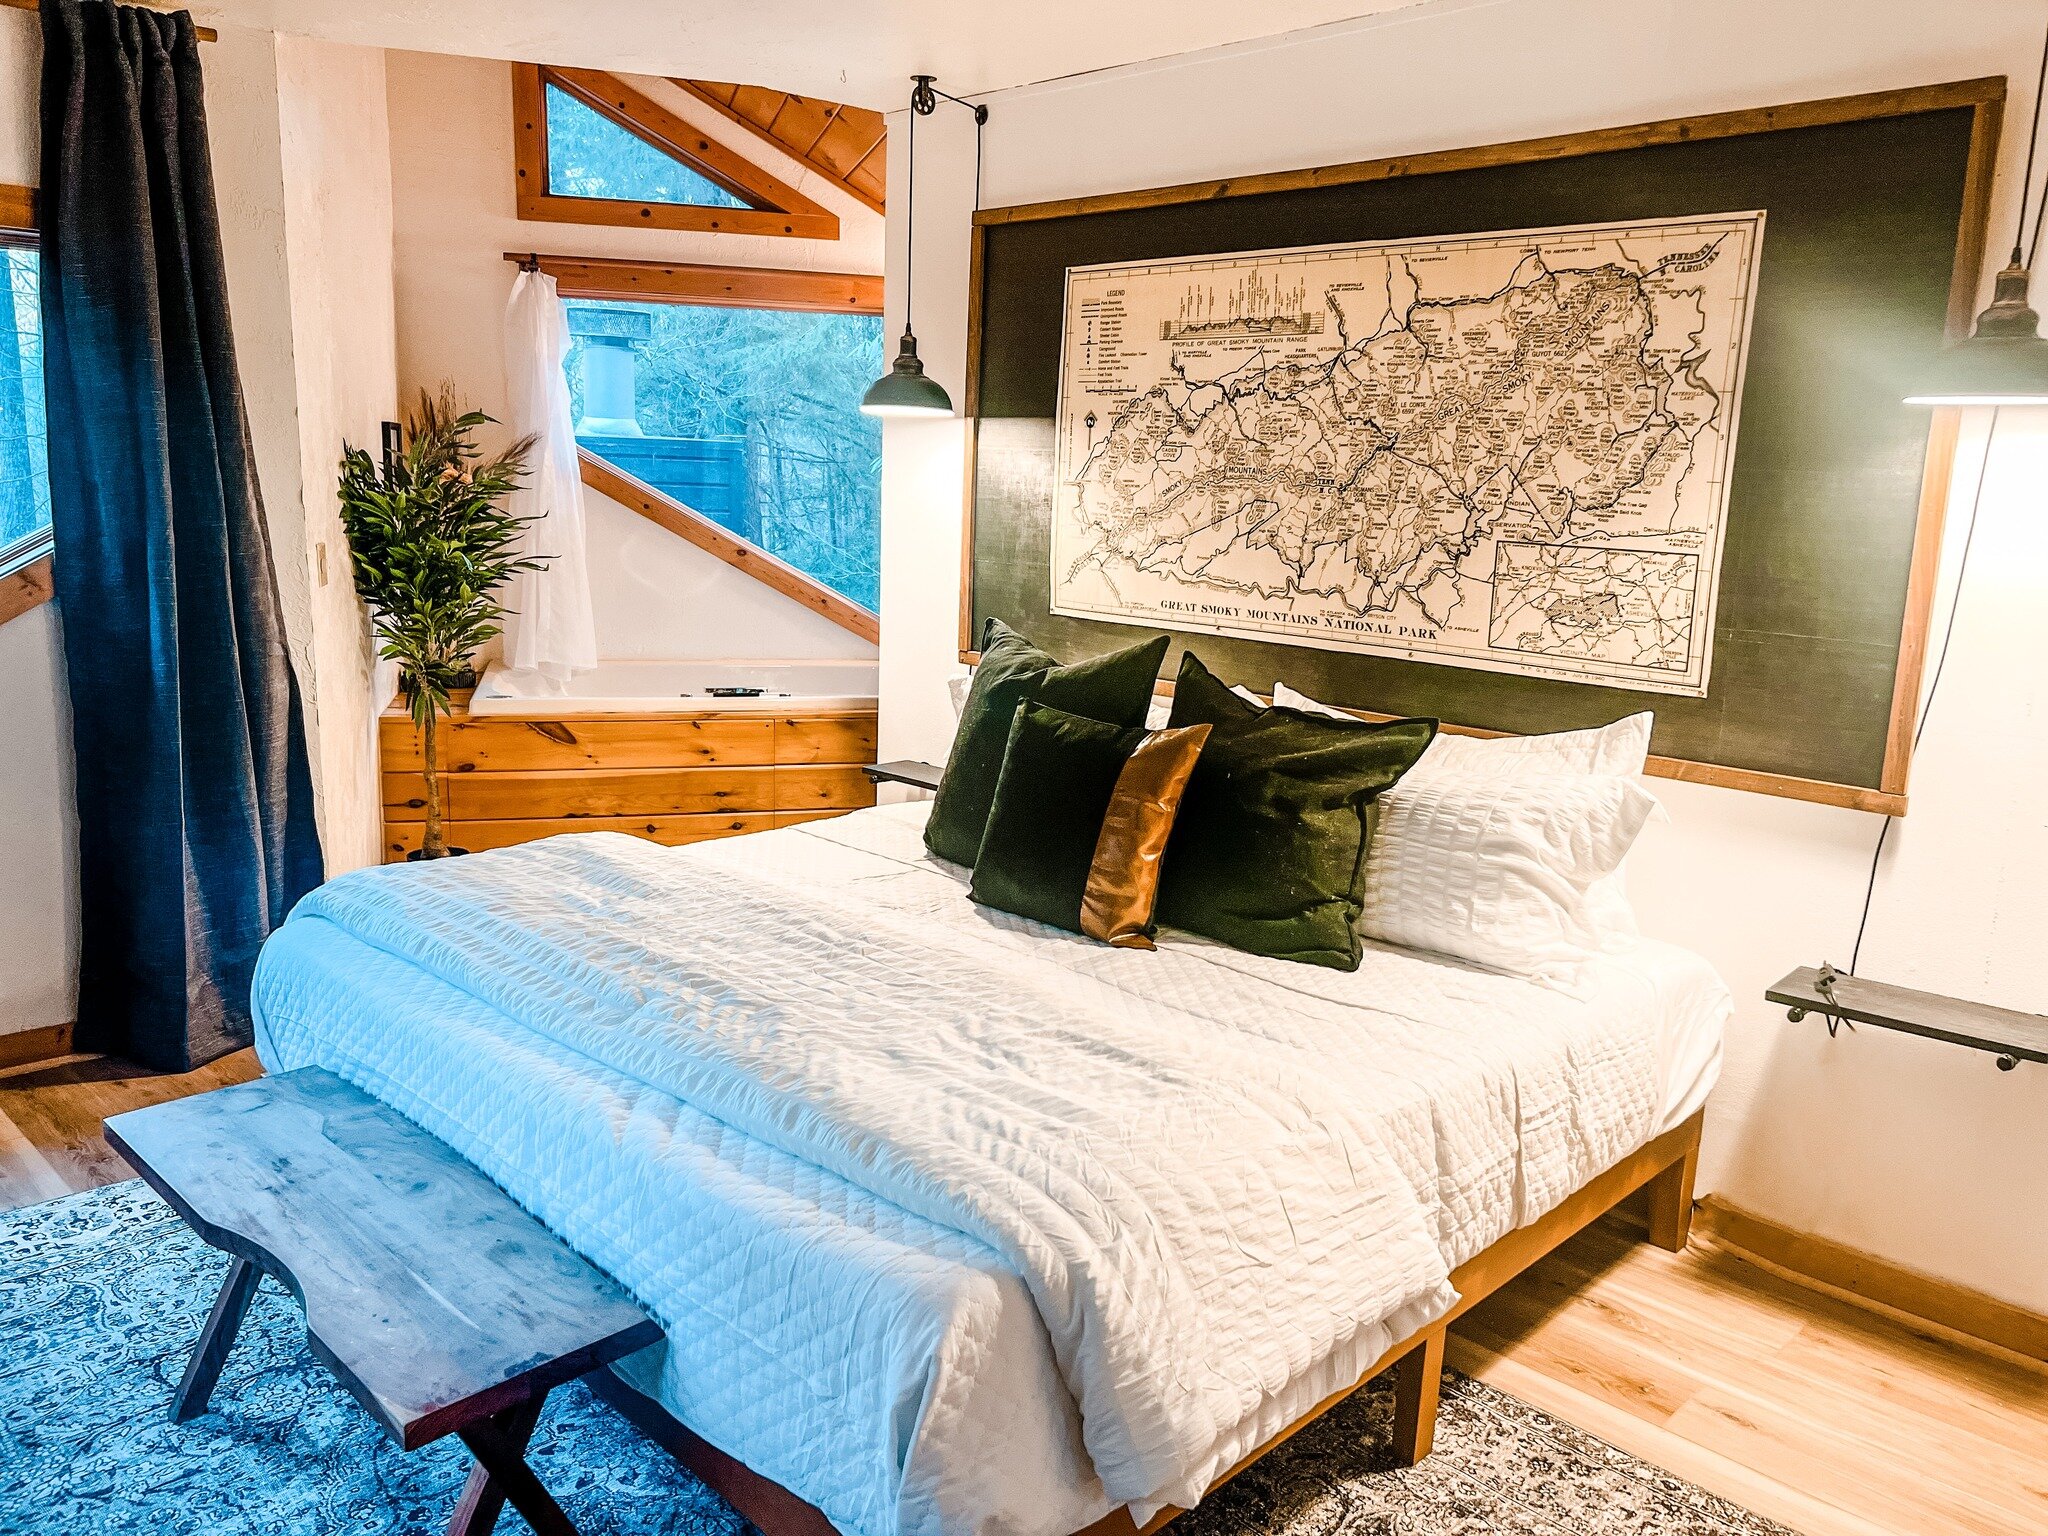 Looking for the perfect cabin to escape to in the Smoky Mountains? Look no further! Our 3-bedroom cabin features breathtaking forest views and a relaxing outdoor spa perfect for unwinding after a long day of exploring. Book your stay today and experi